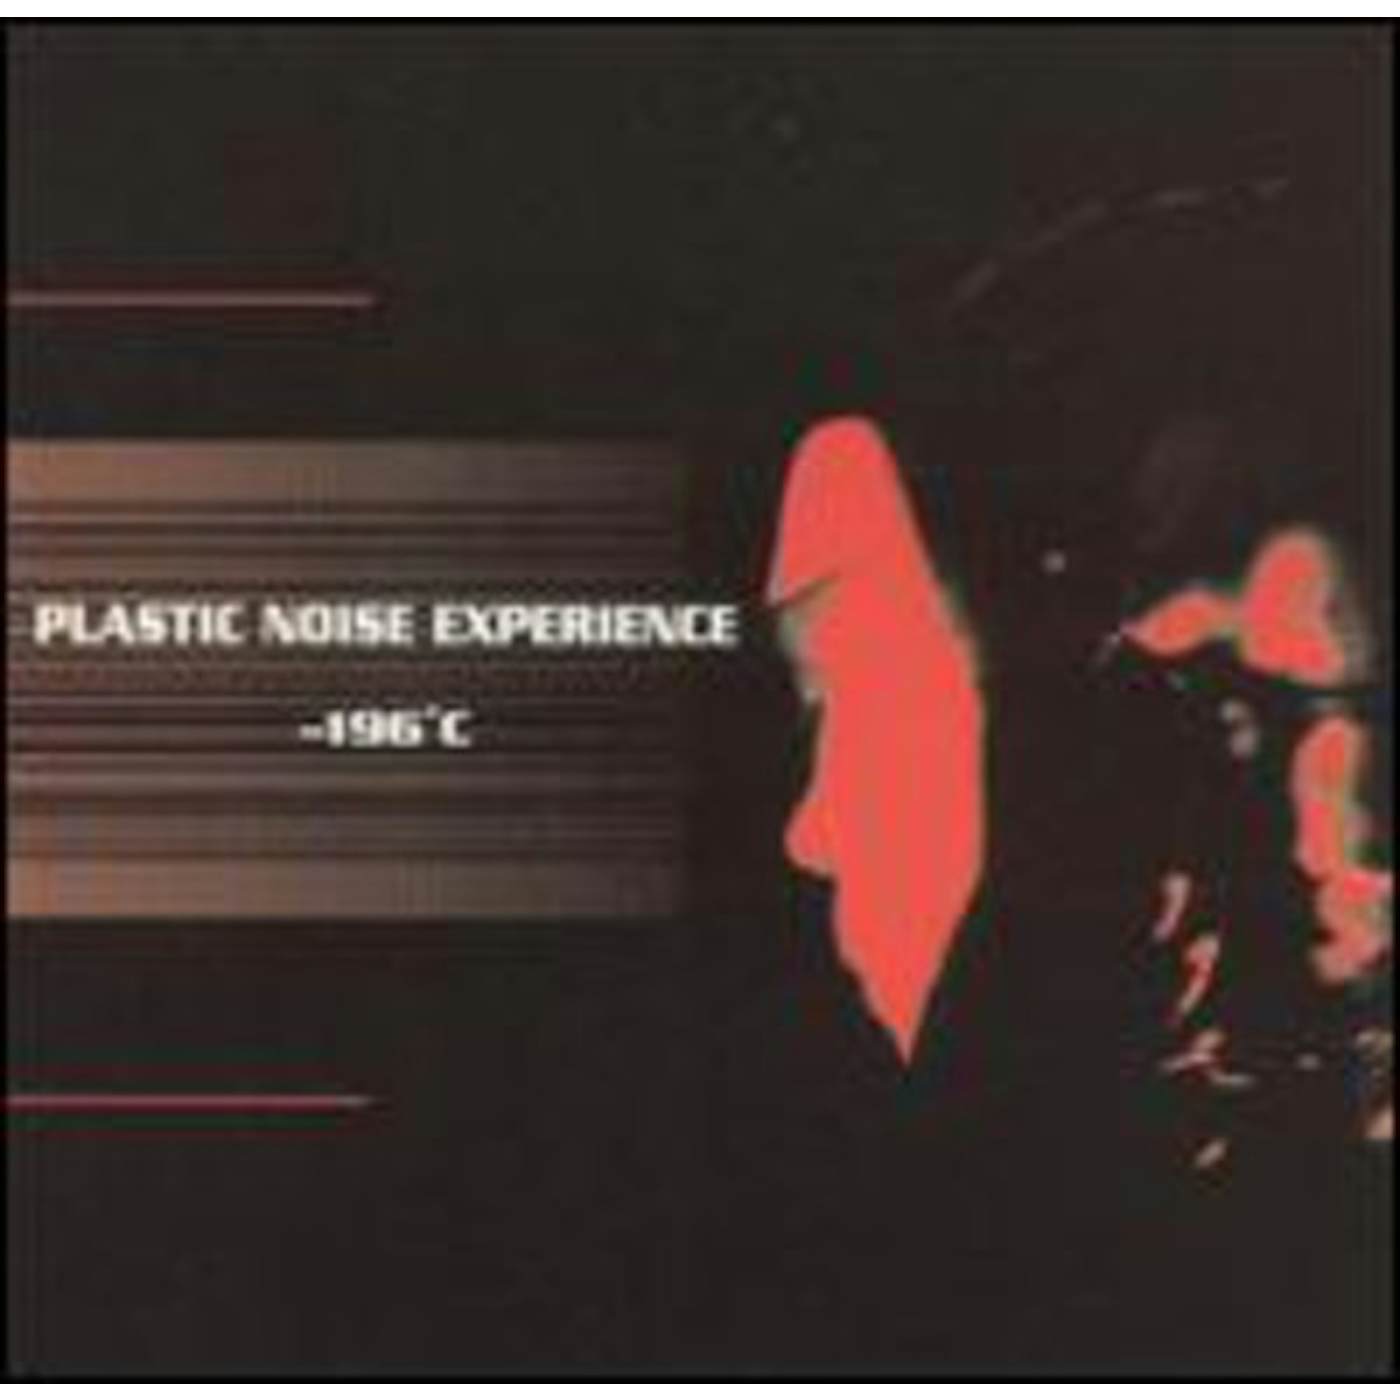 The Plastic Noise Experience -196 C CD